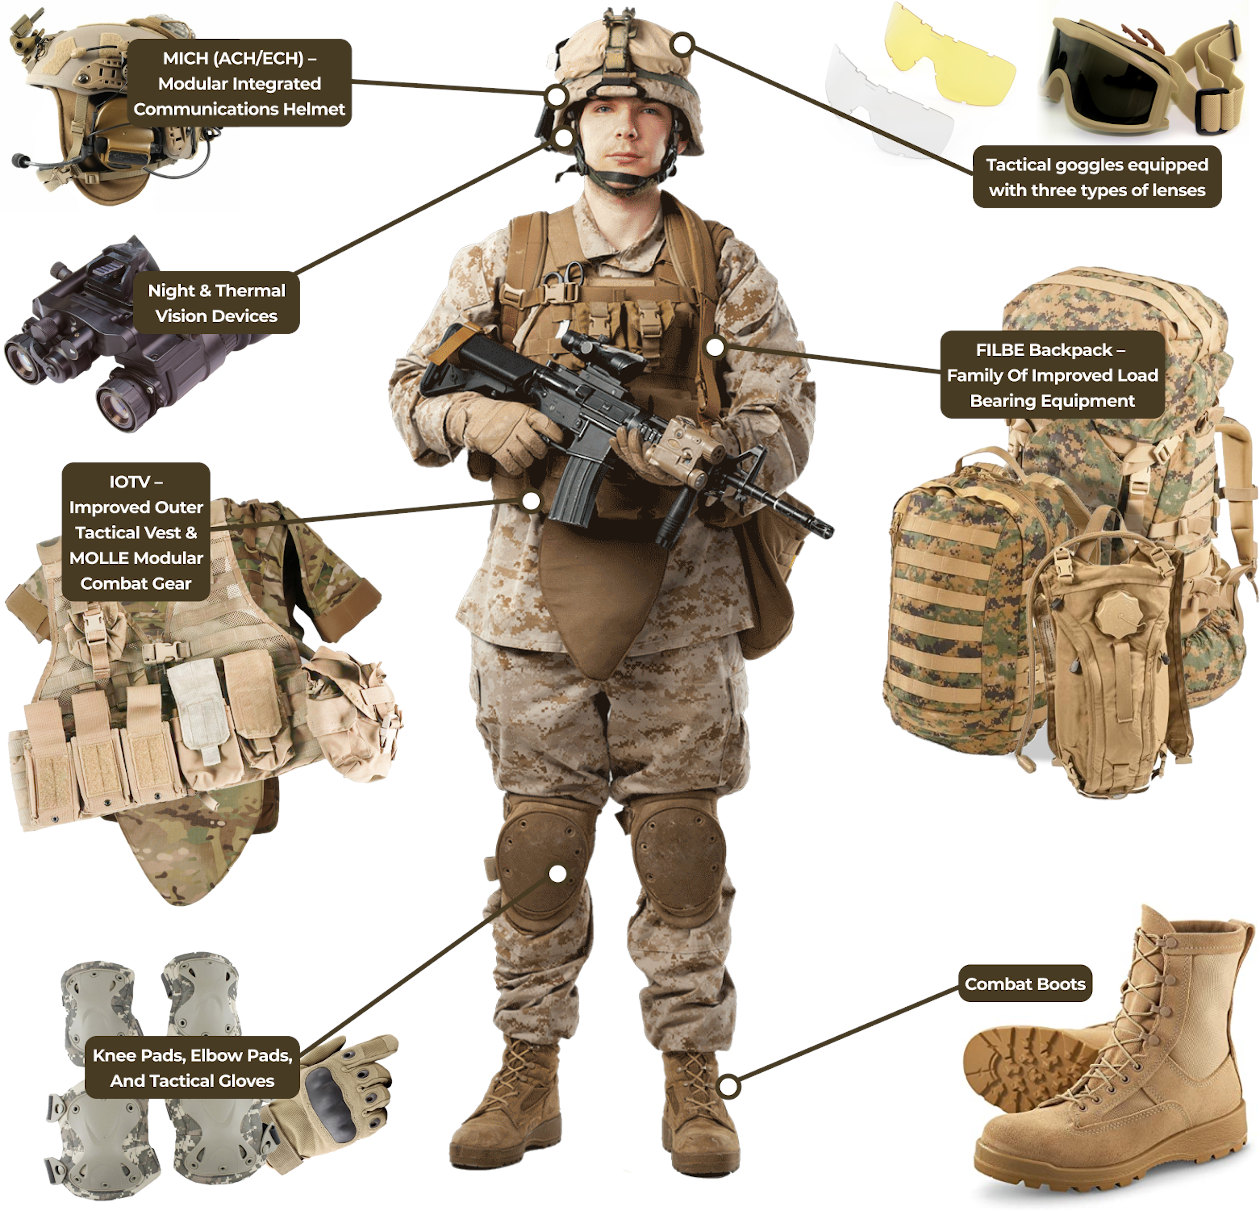 US soldier equipment. Part 3. History AGM Global Vision